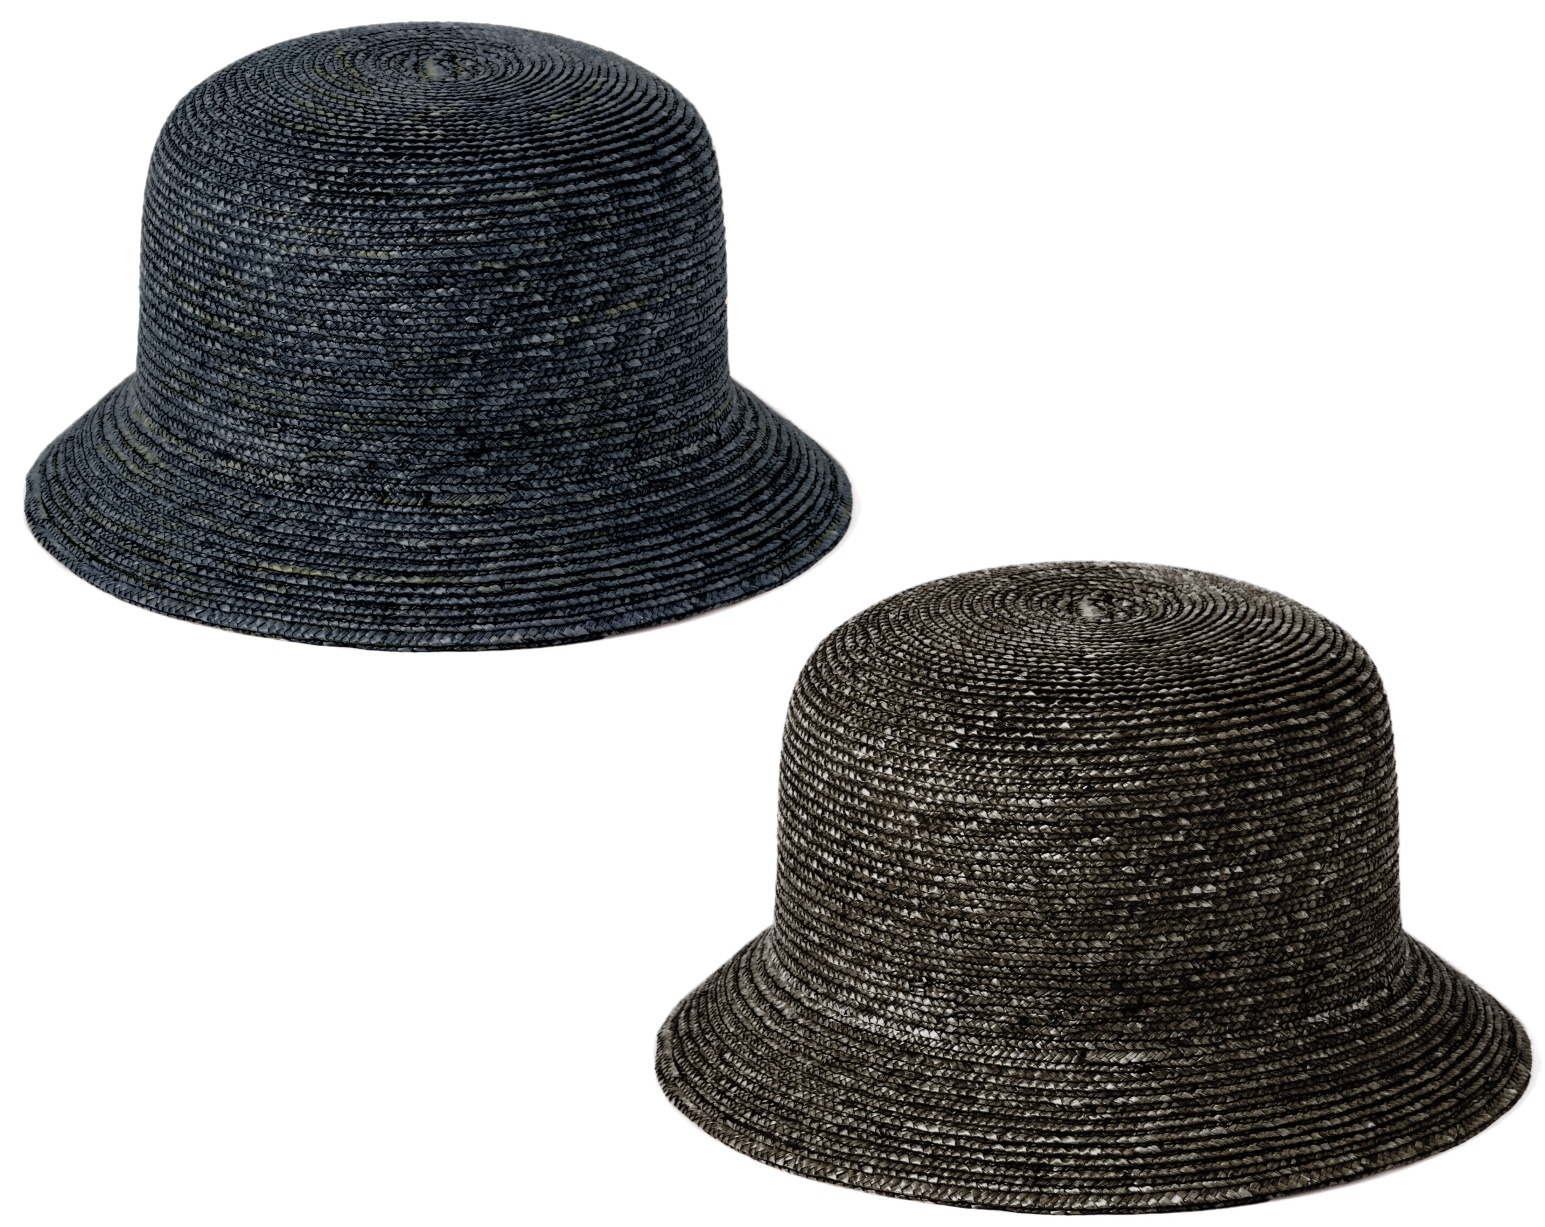 Barley lacquer hat